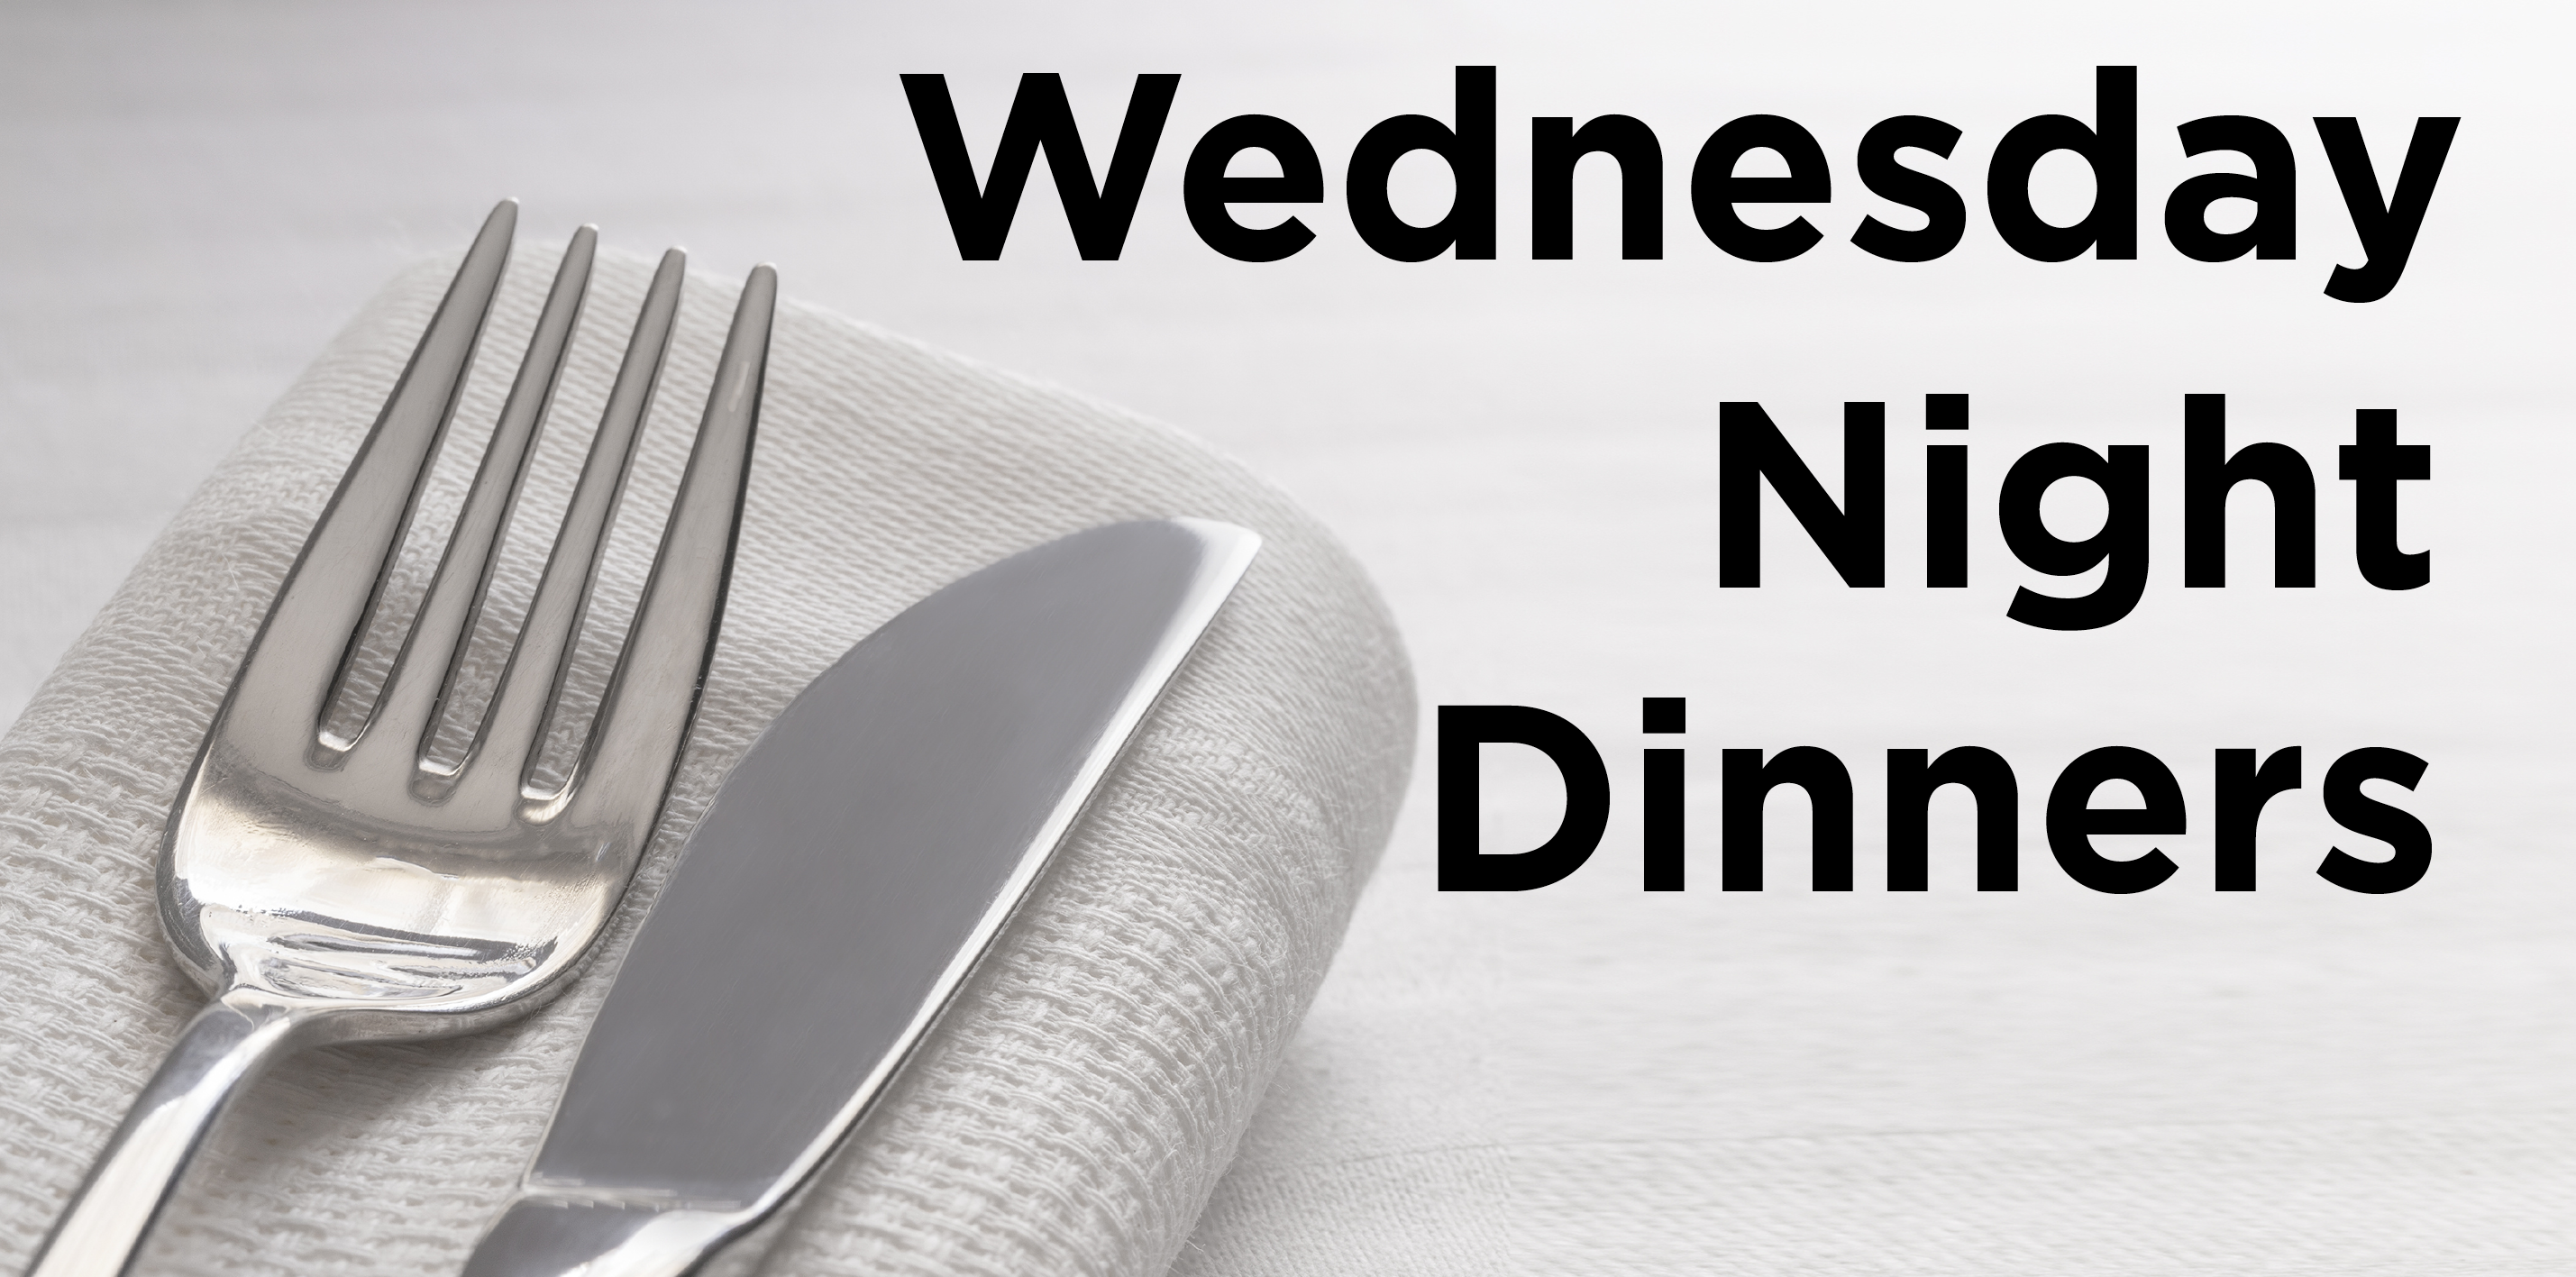 WEDNESDAY NIGHT DINNER RESERVATION/PAYMENT